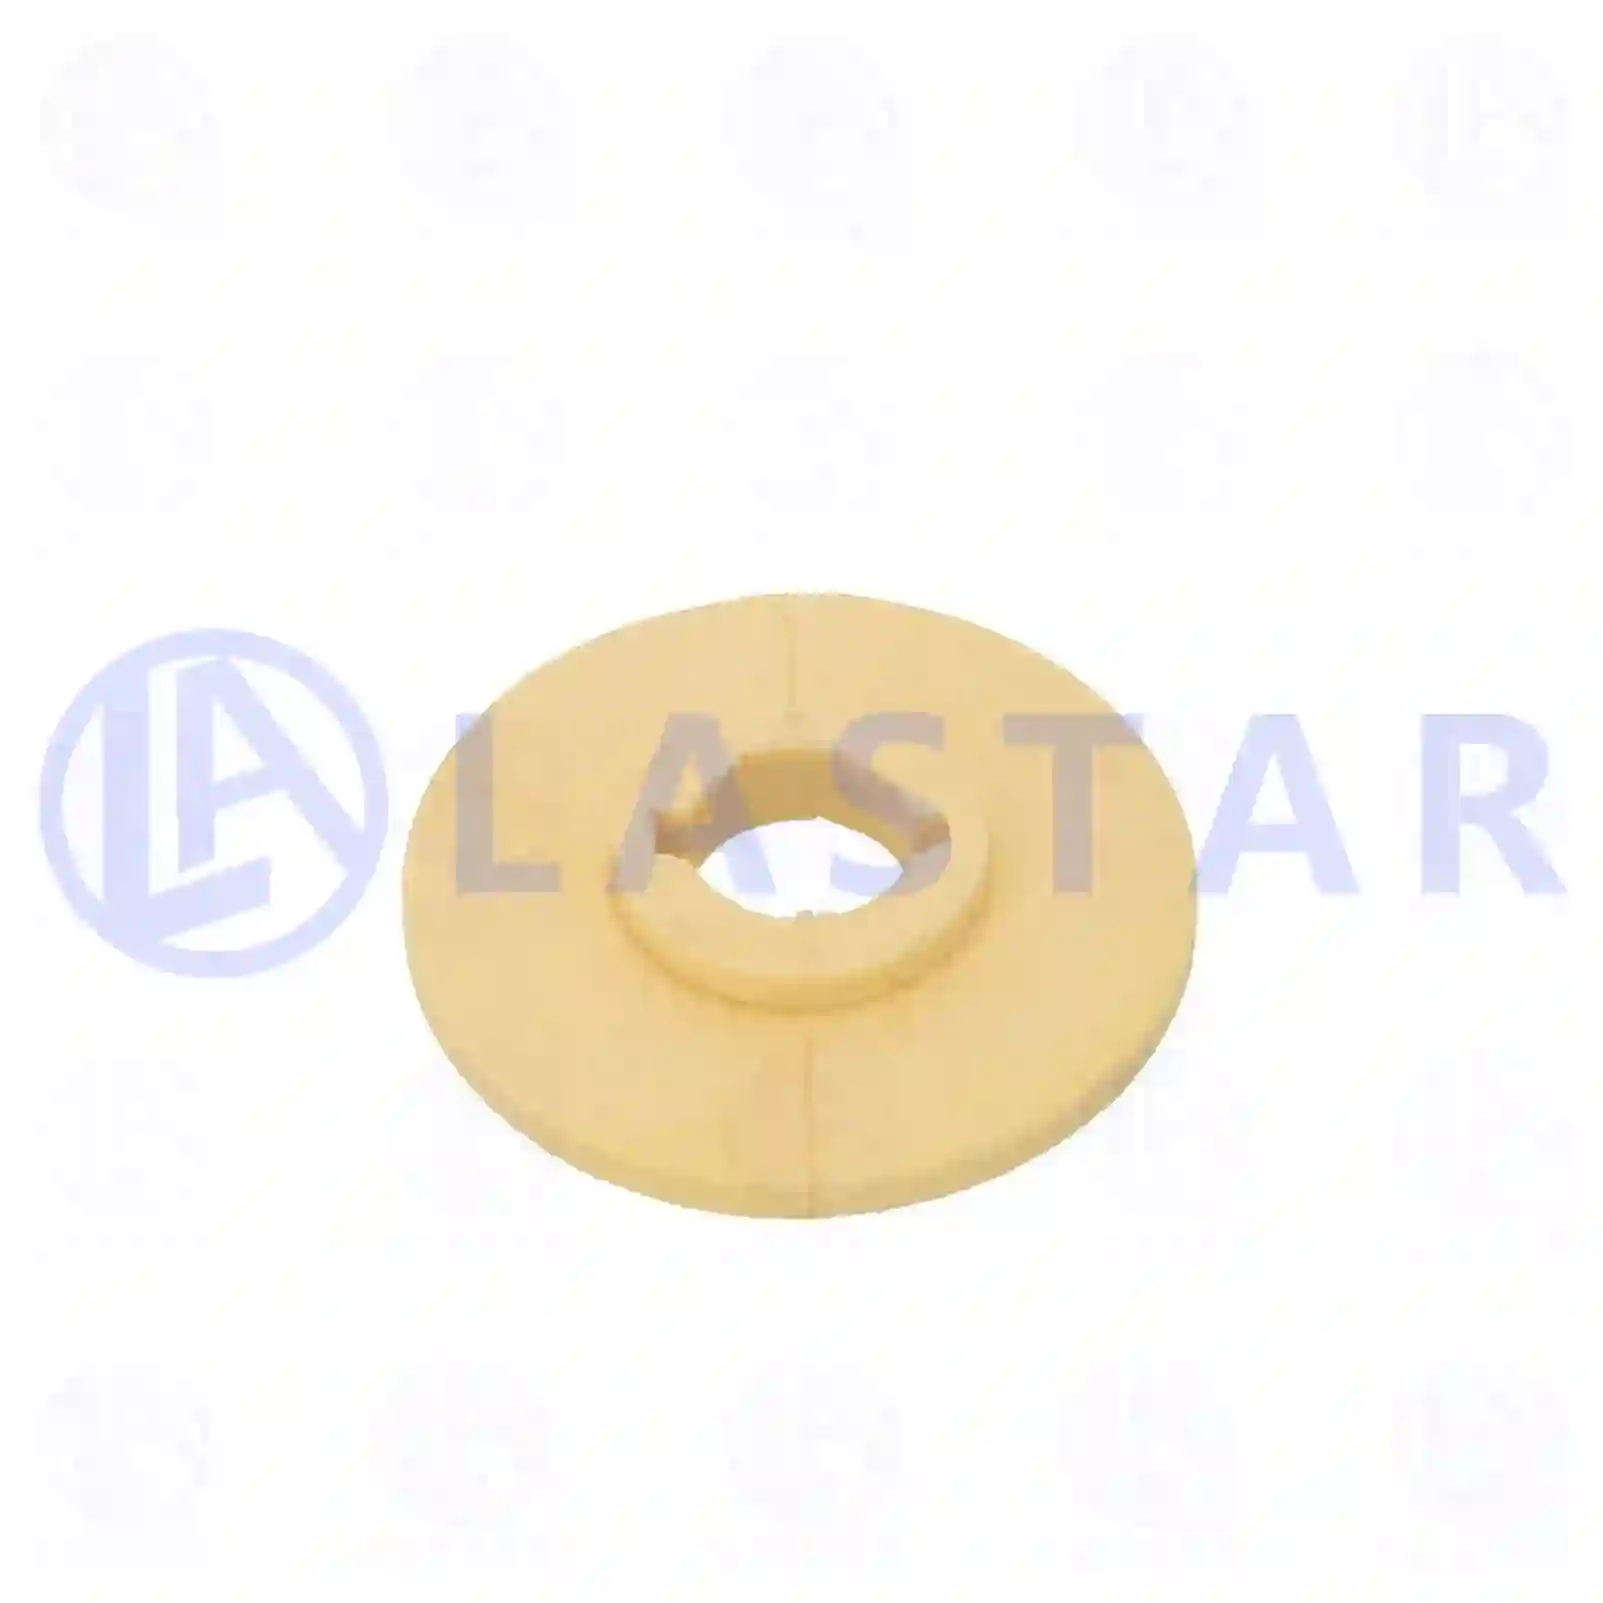 Washer, 77721766, 1353965 ||  77721766 Lastar Spare Part | Truck Spare Parts, Auotomotive Spare Parts Washer, 77721766, 1353965 ||  77721766 Lastar Spare Part | Truck Spare Parts, Auotomotive Spare Parts